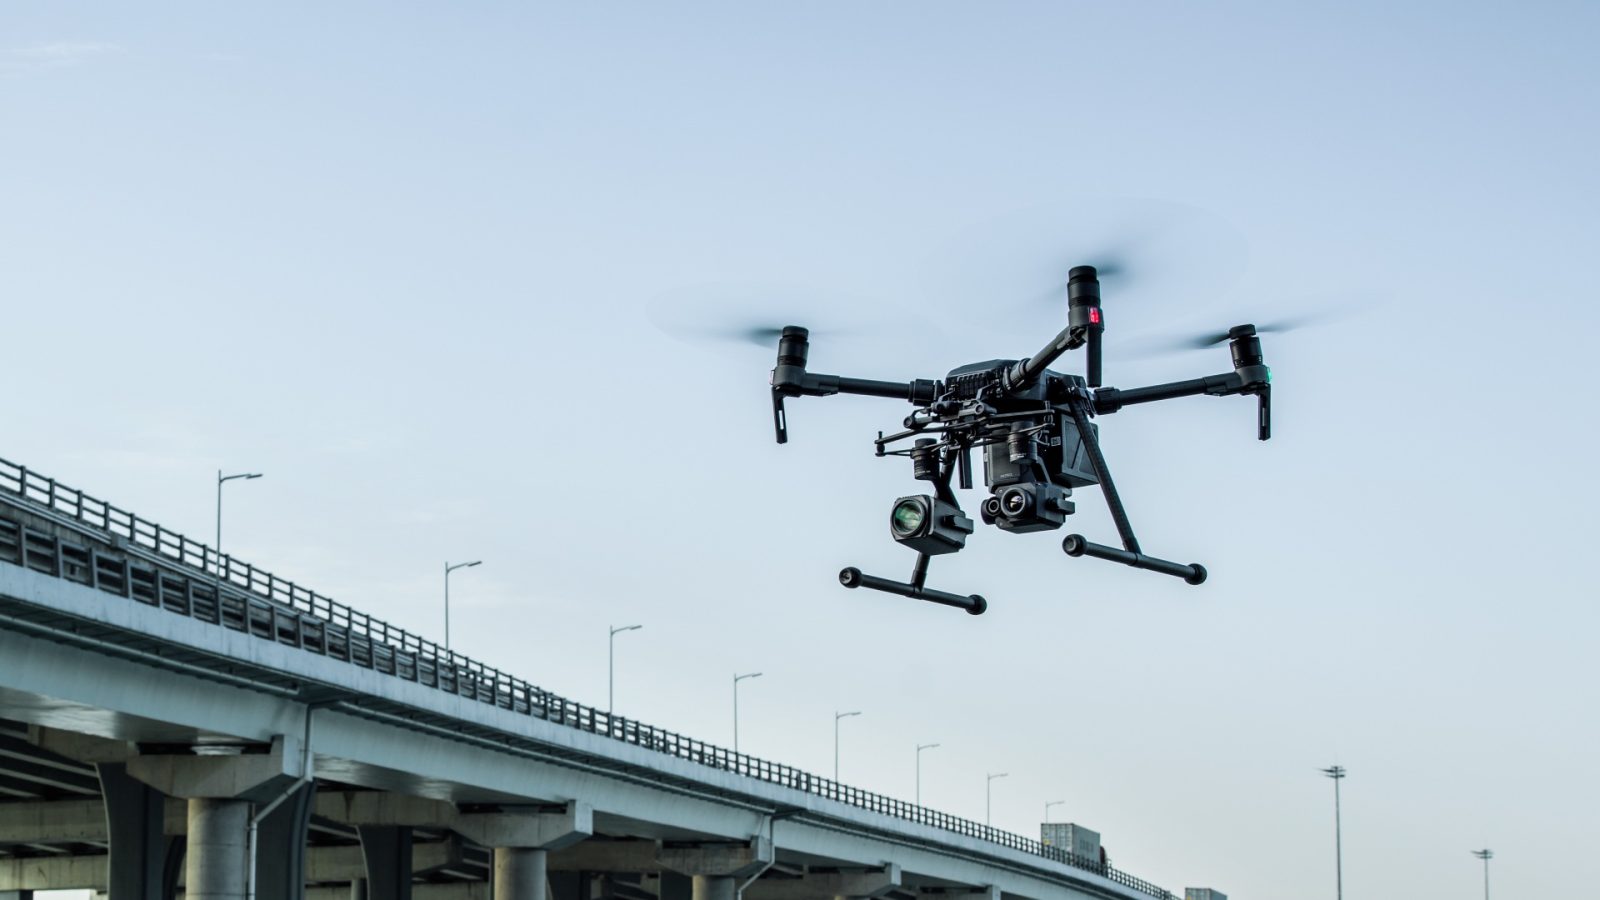 DJI Matrice 300 rumored to be launched in late February